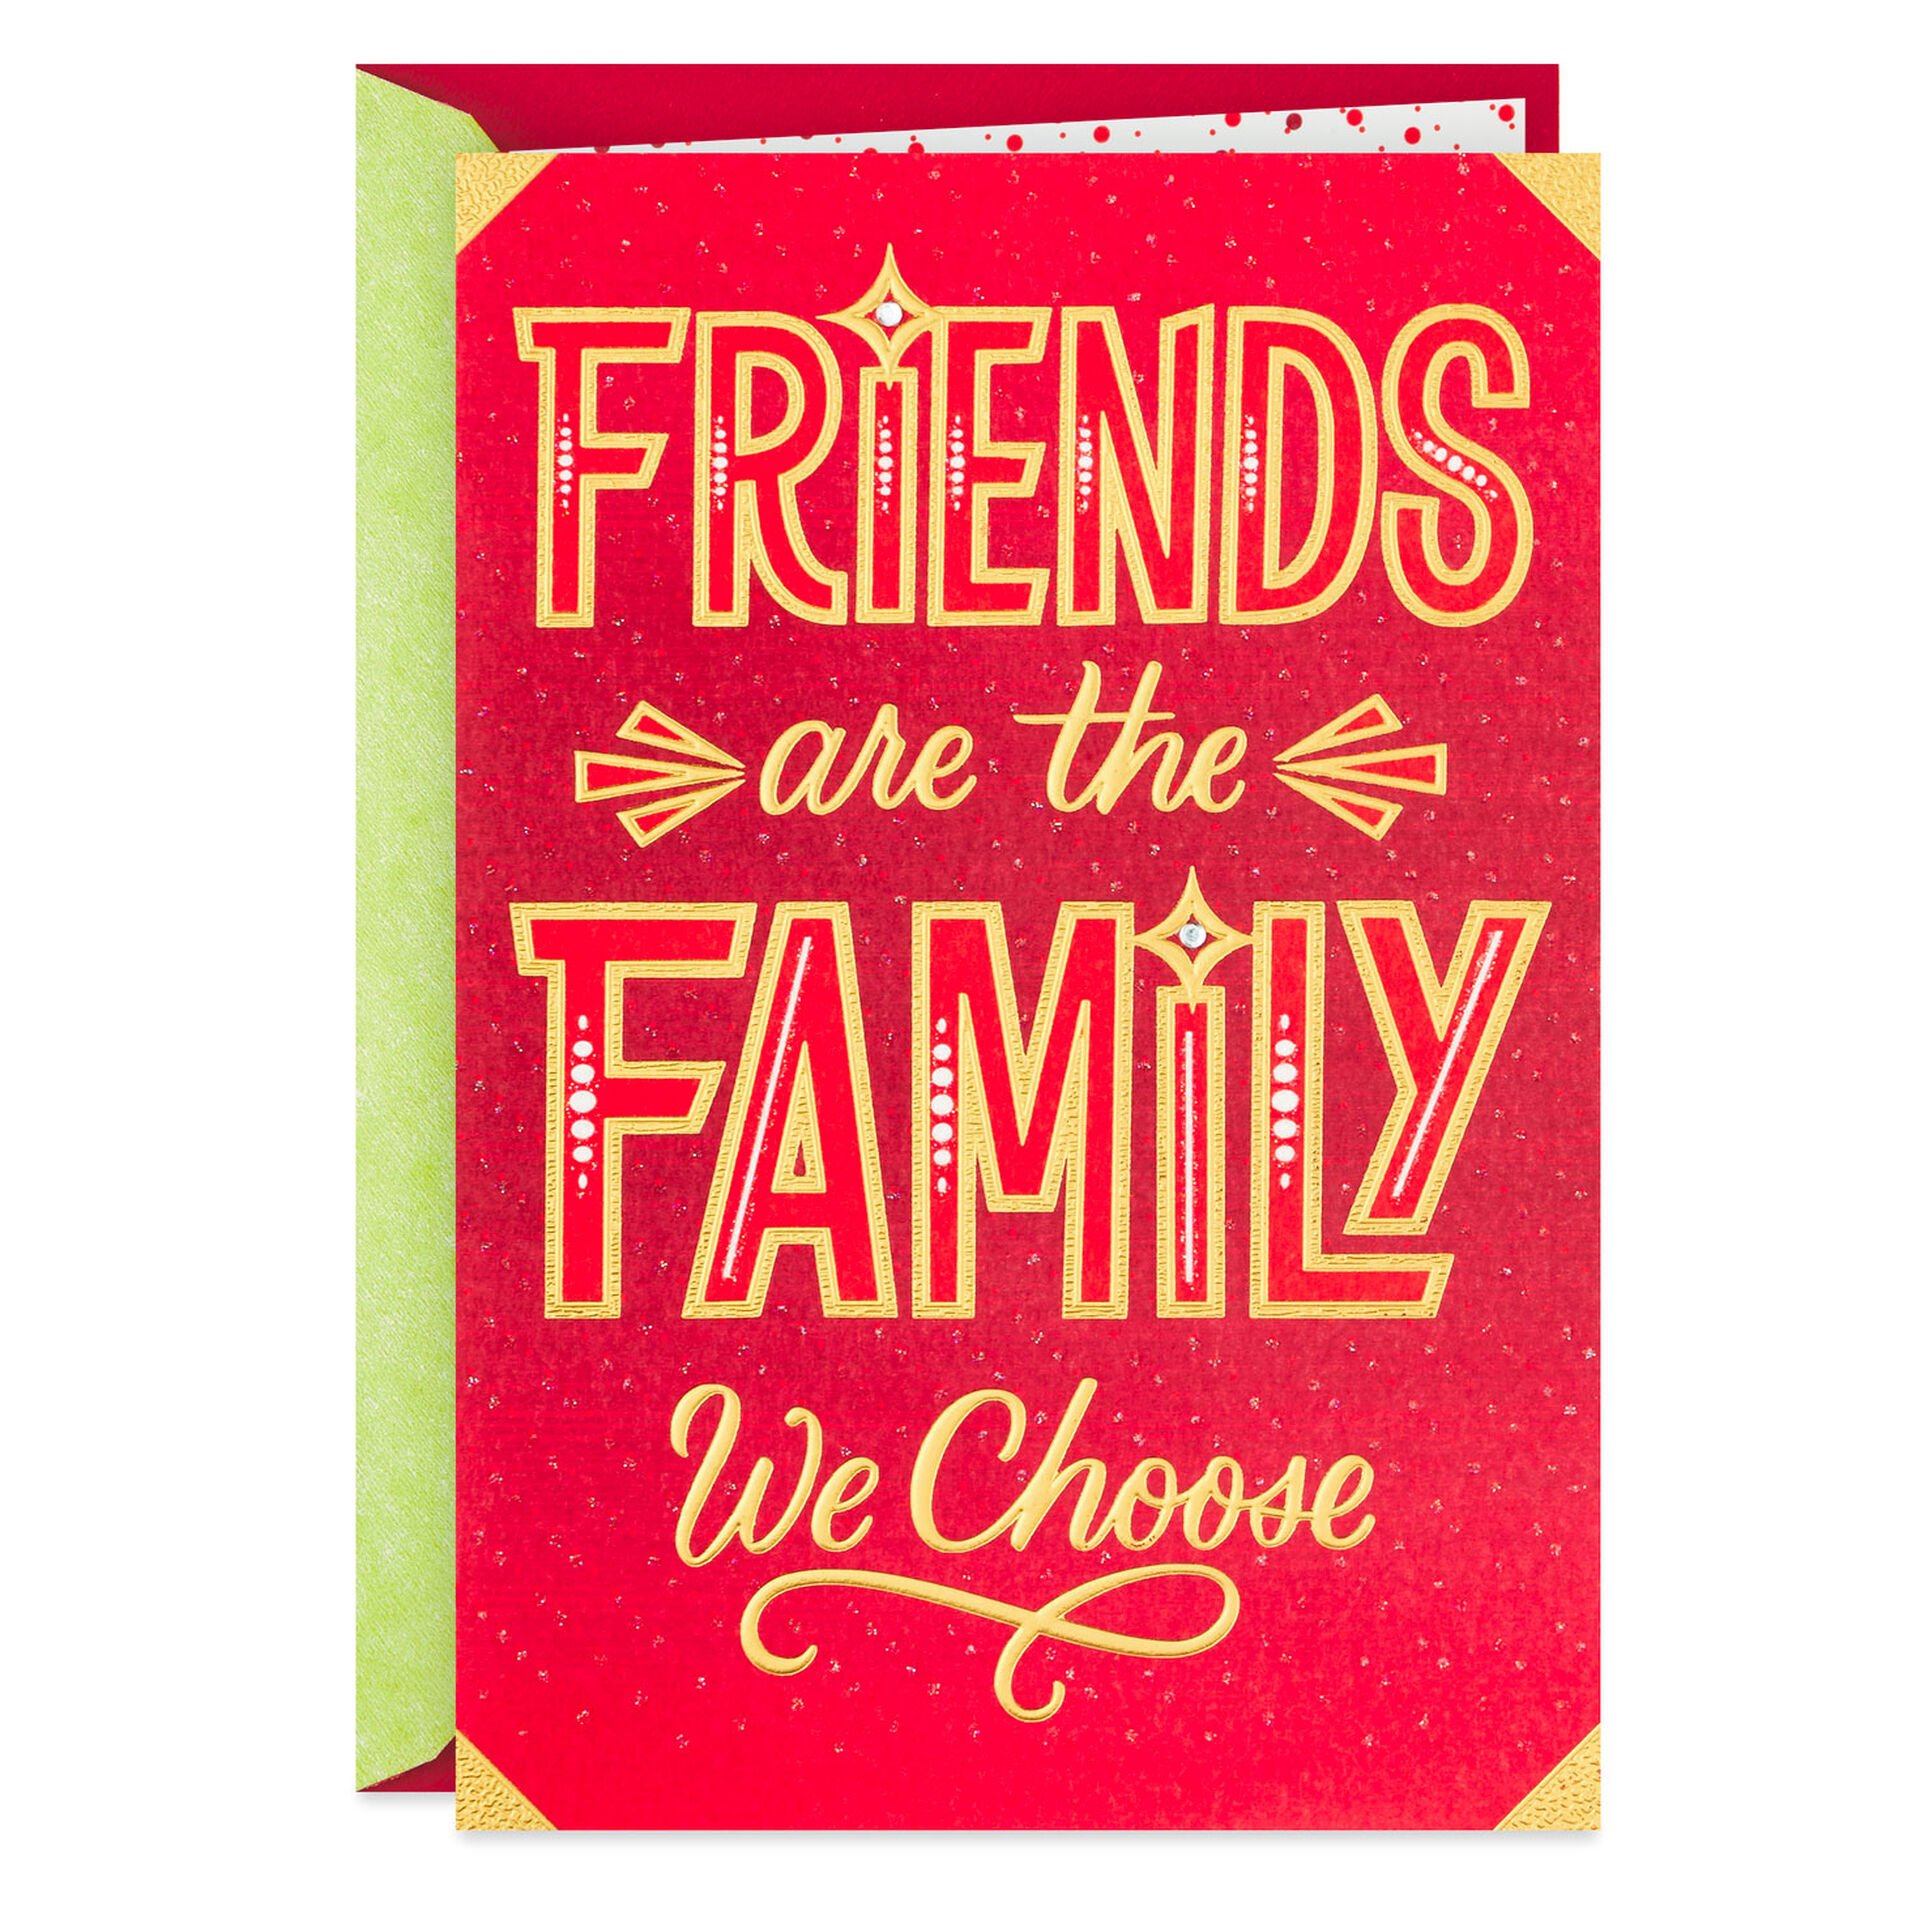 Red-and-Gold-Lettering-Holiday-Card-for-Friend_559XZH3712_01.jpeg